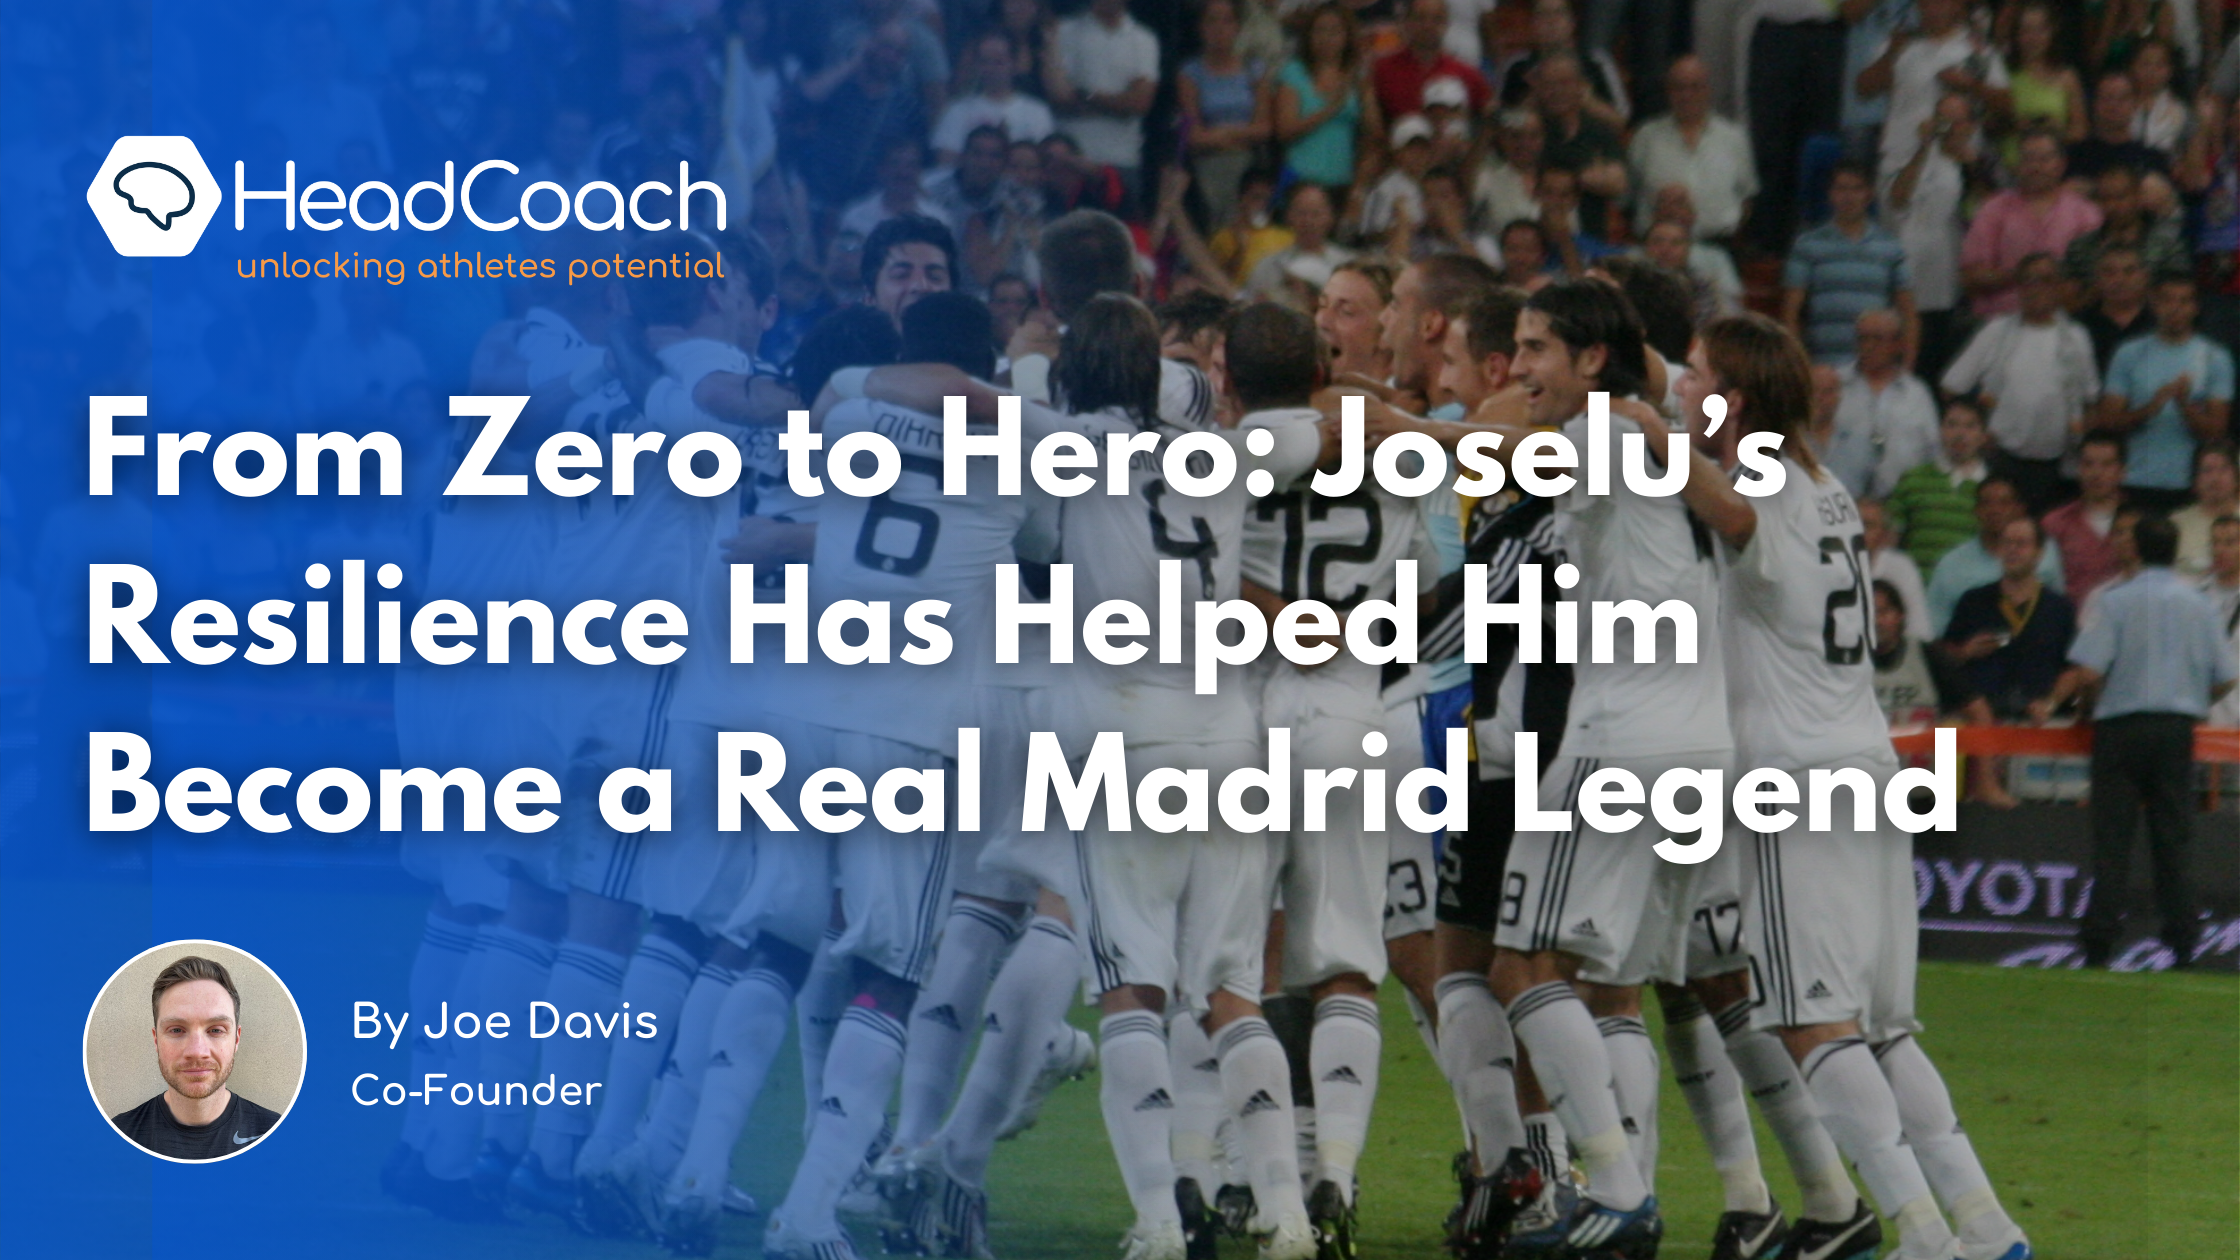 From Zero to Hero: Joselu’s Resilience Has Helped Him Become a Real Madrid Legend